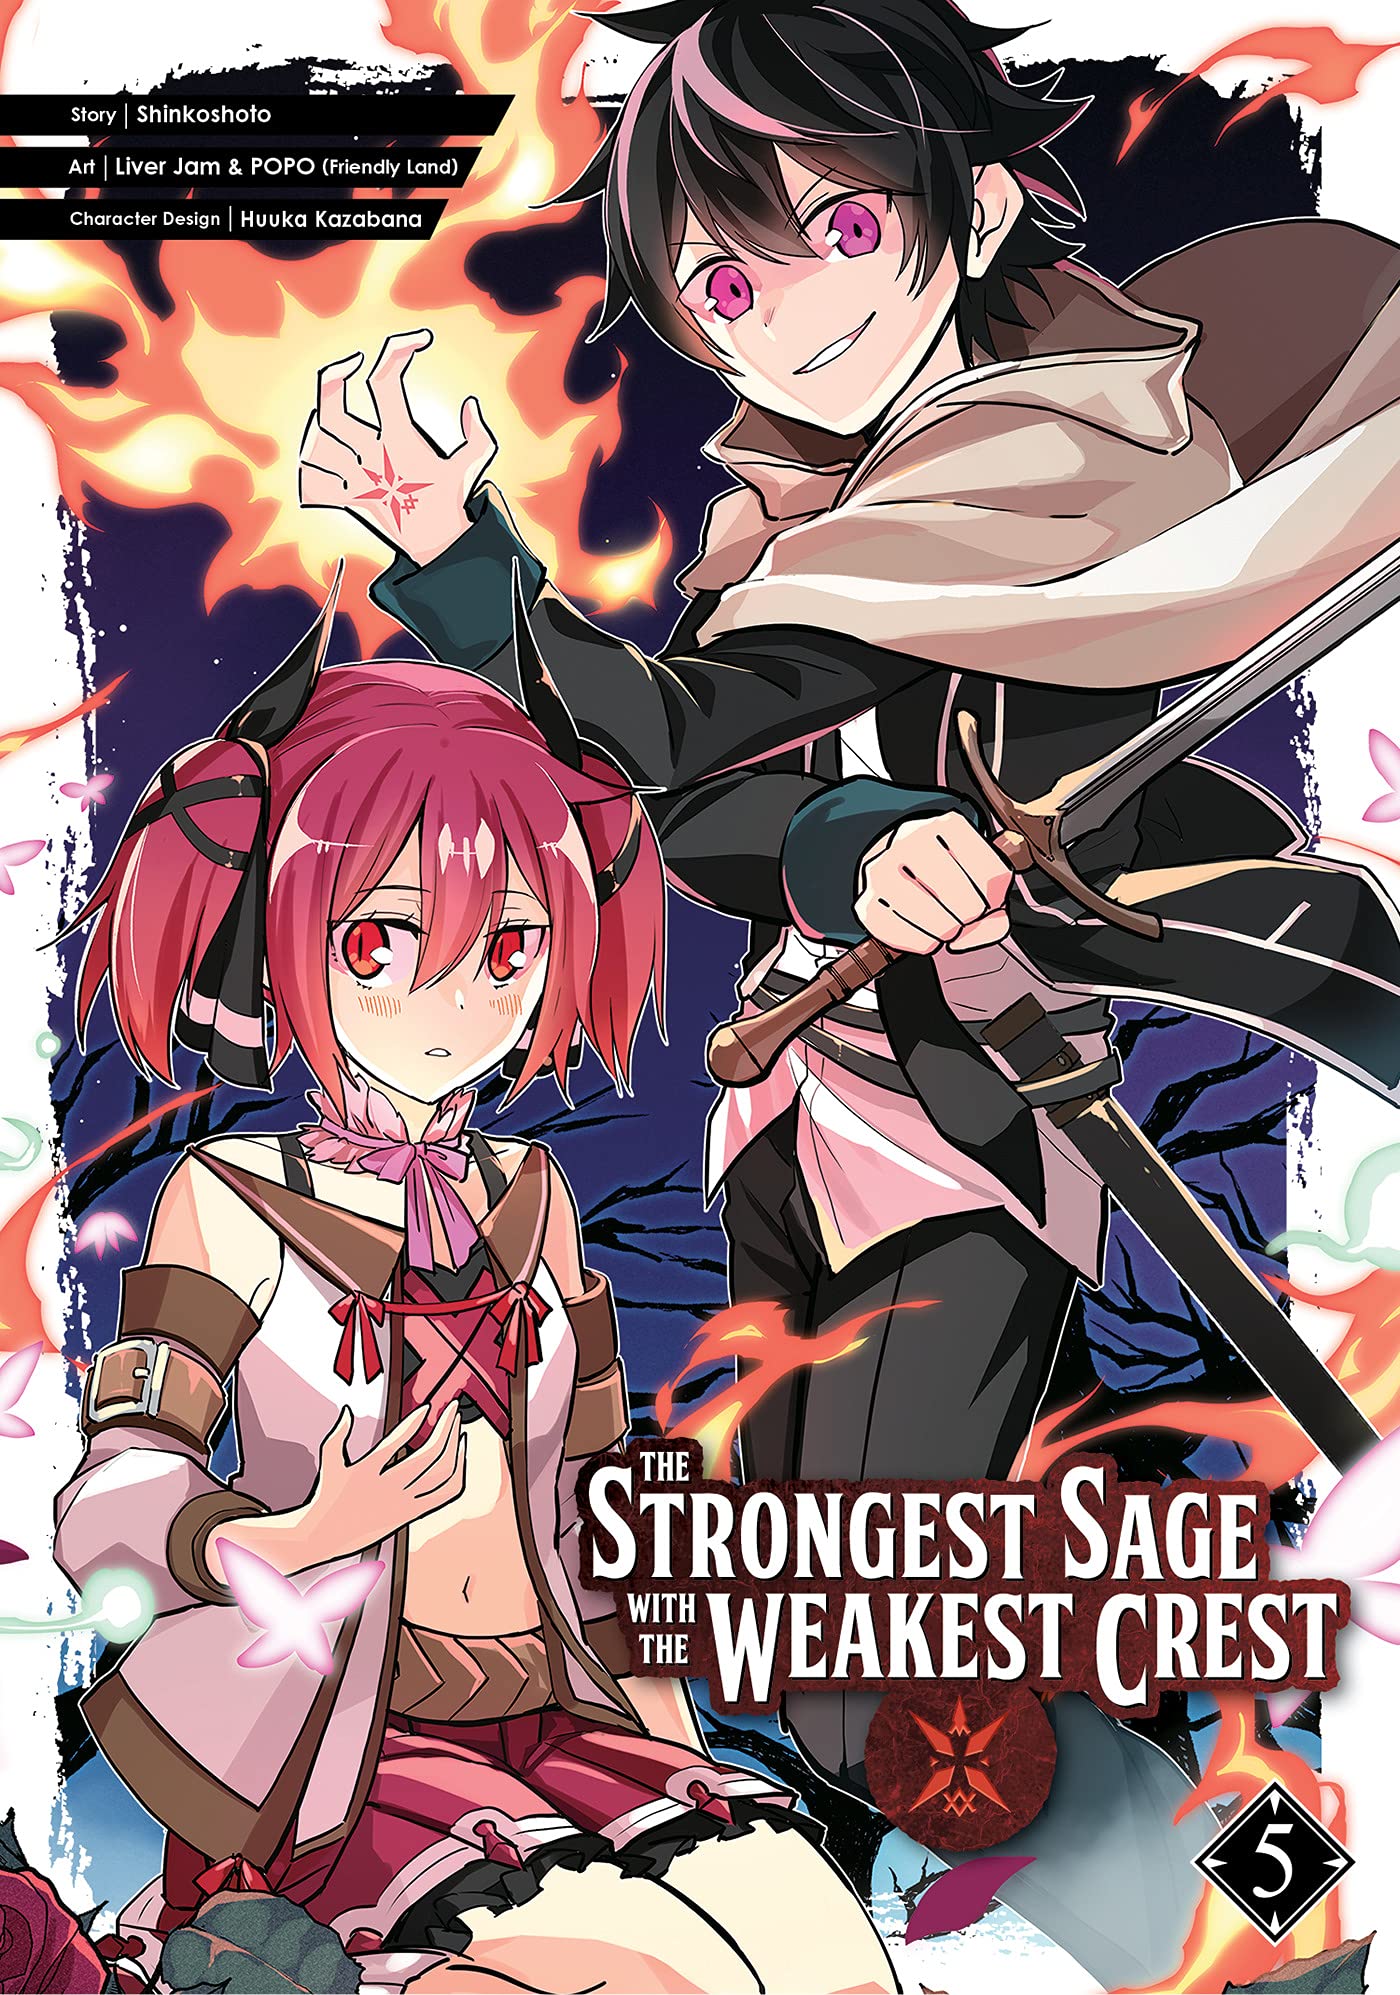 Anime The Strongest Sage with the Weakest Crest HD Wallpaper